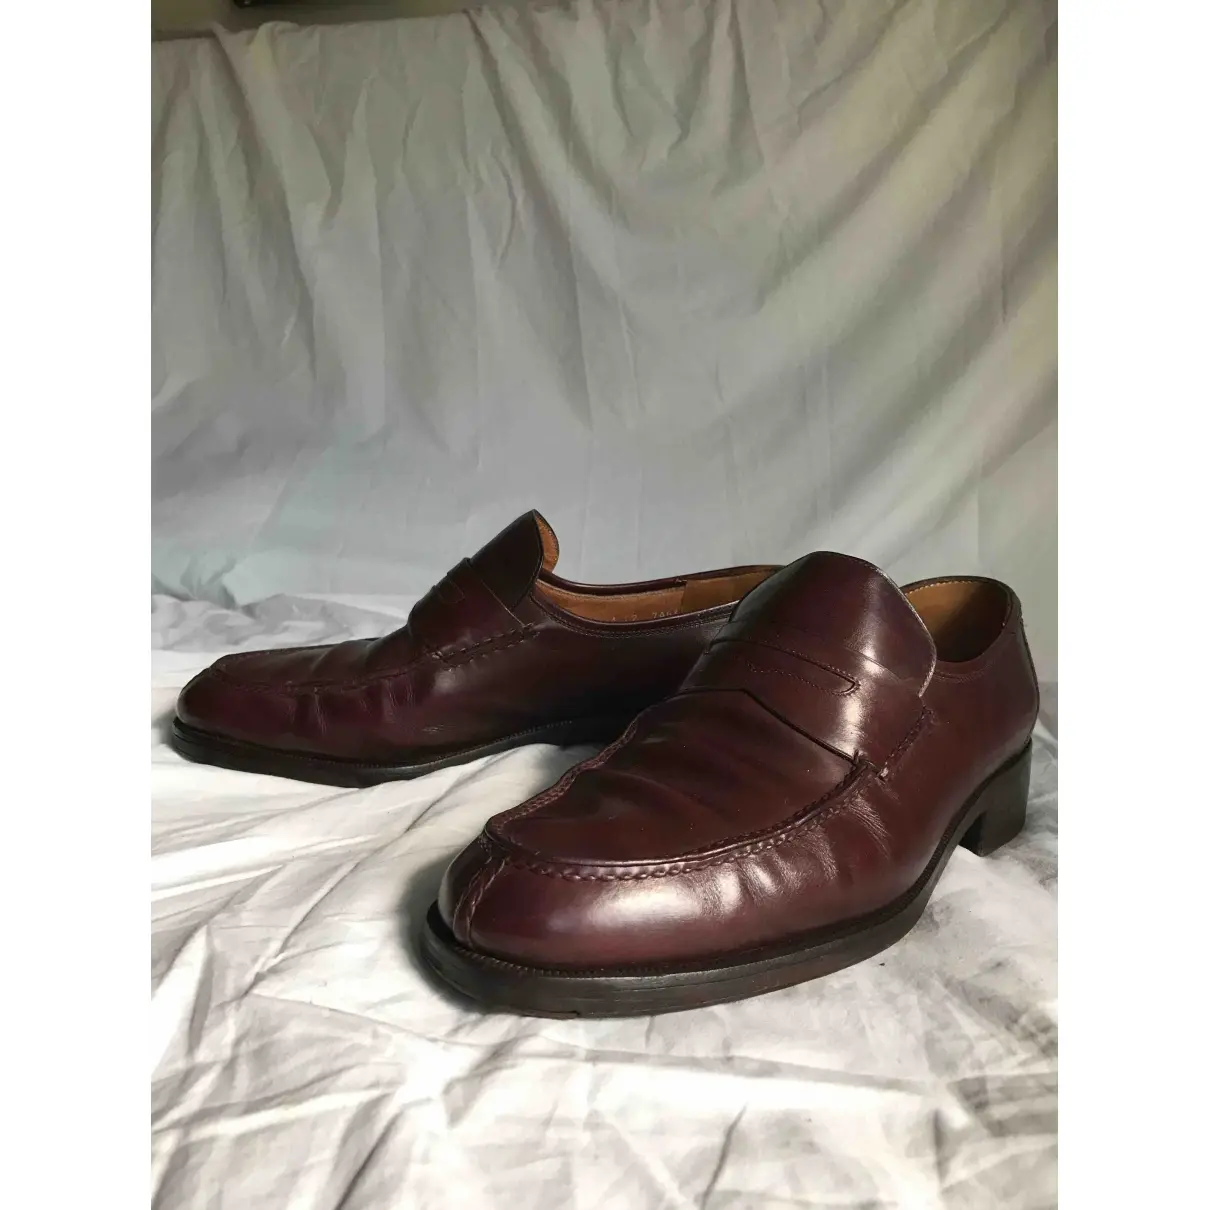 Aubercy Leather flats for sale - Vintage